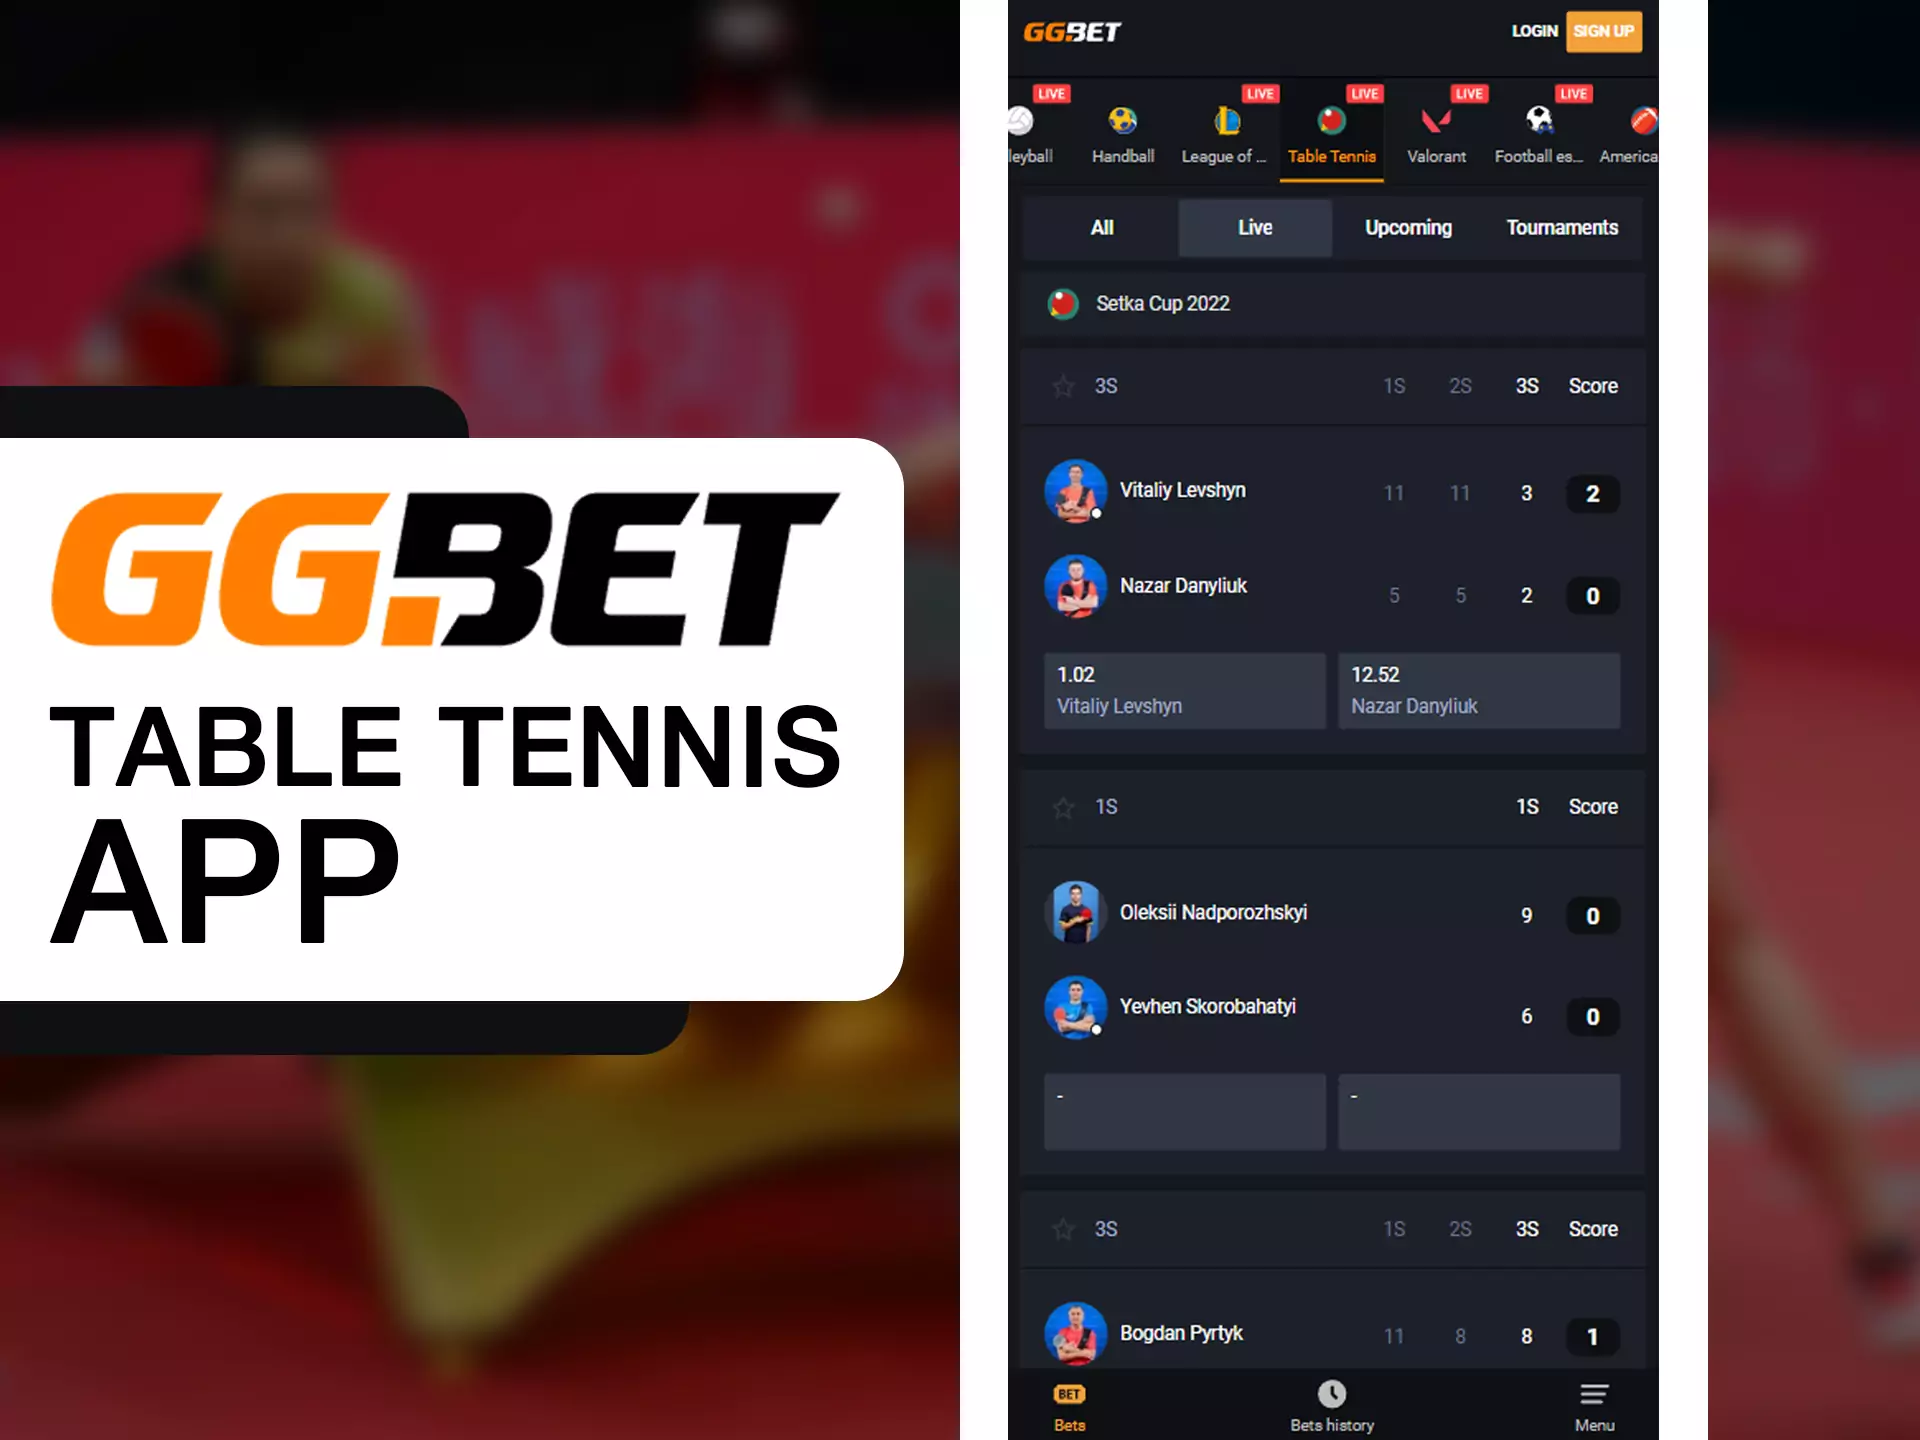 Bet on best table tennis player at GGBet.